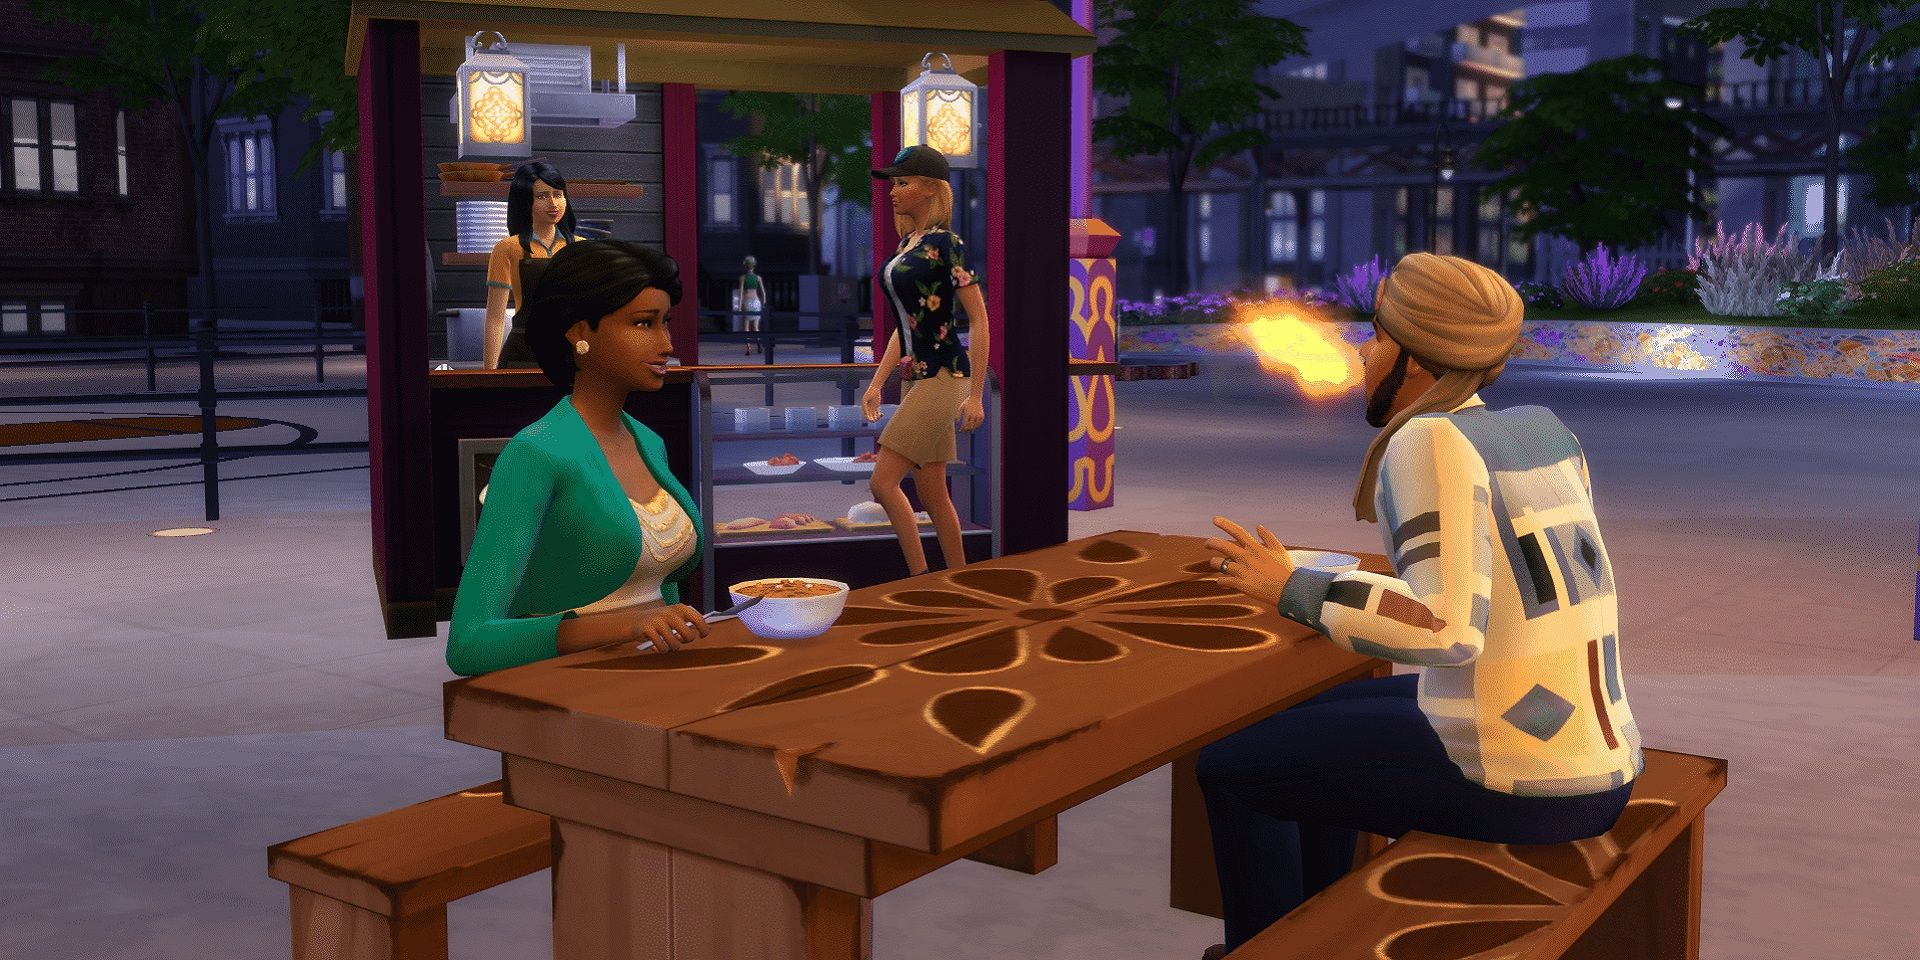 Two Sims eating while downtown in The Sims 4 City Living, the food booth is in the background